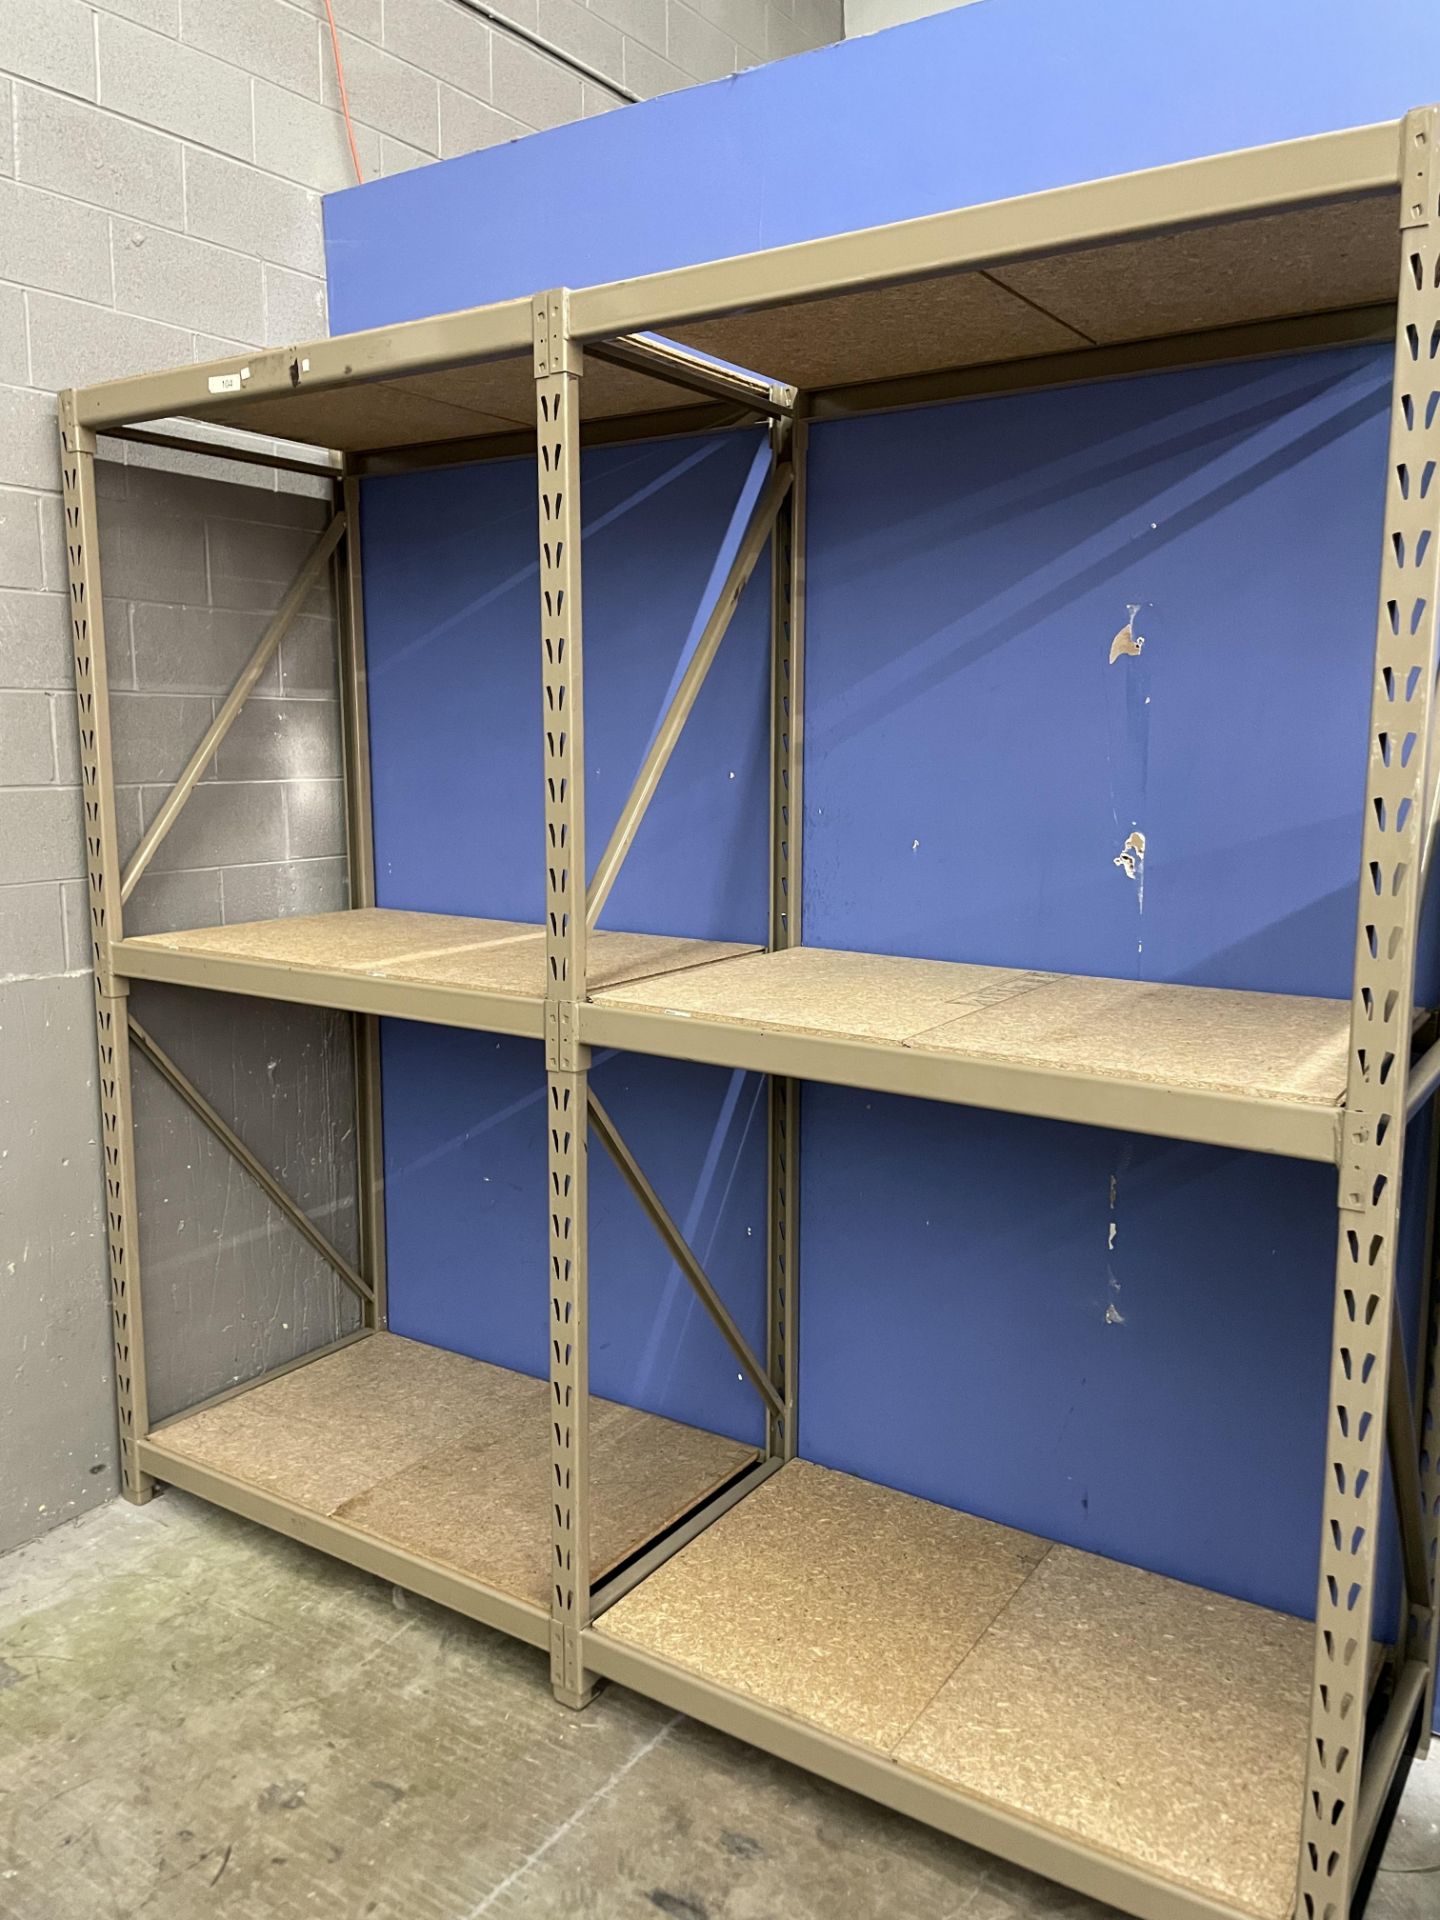 (2) SECTIONS OF HEAVY DUTY ADJUSTABLE SHELVING, 102" X 30" X 96"